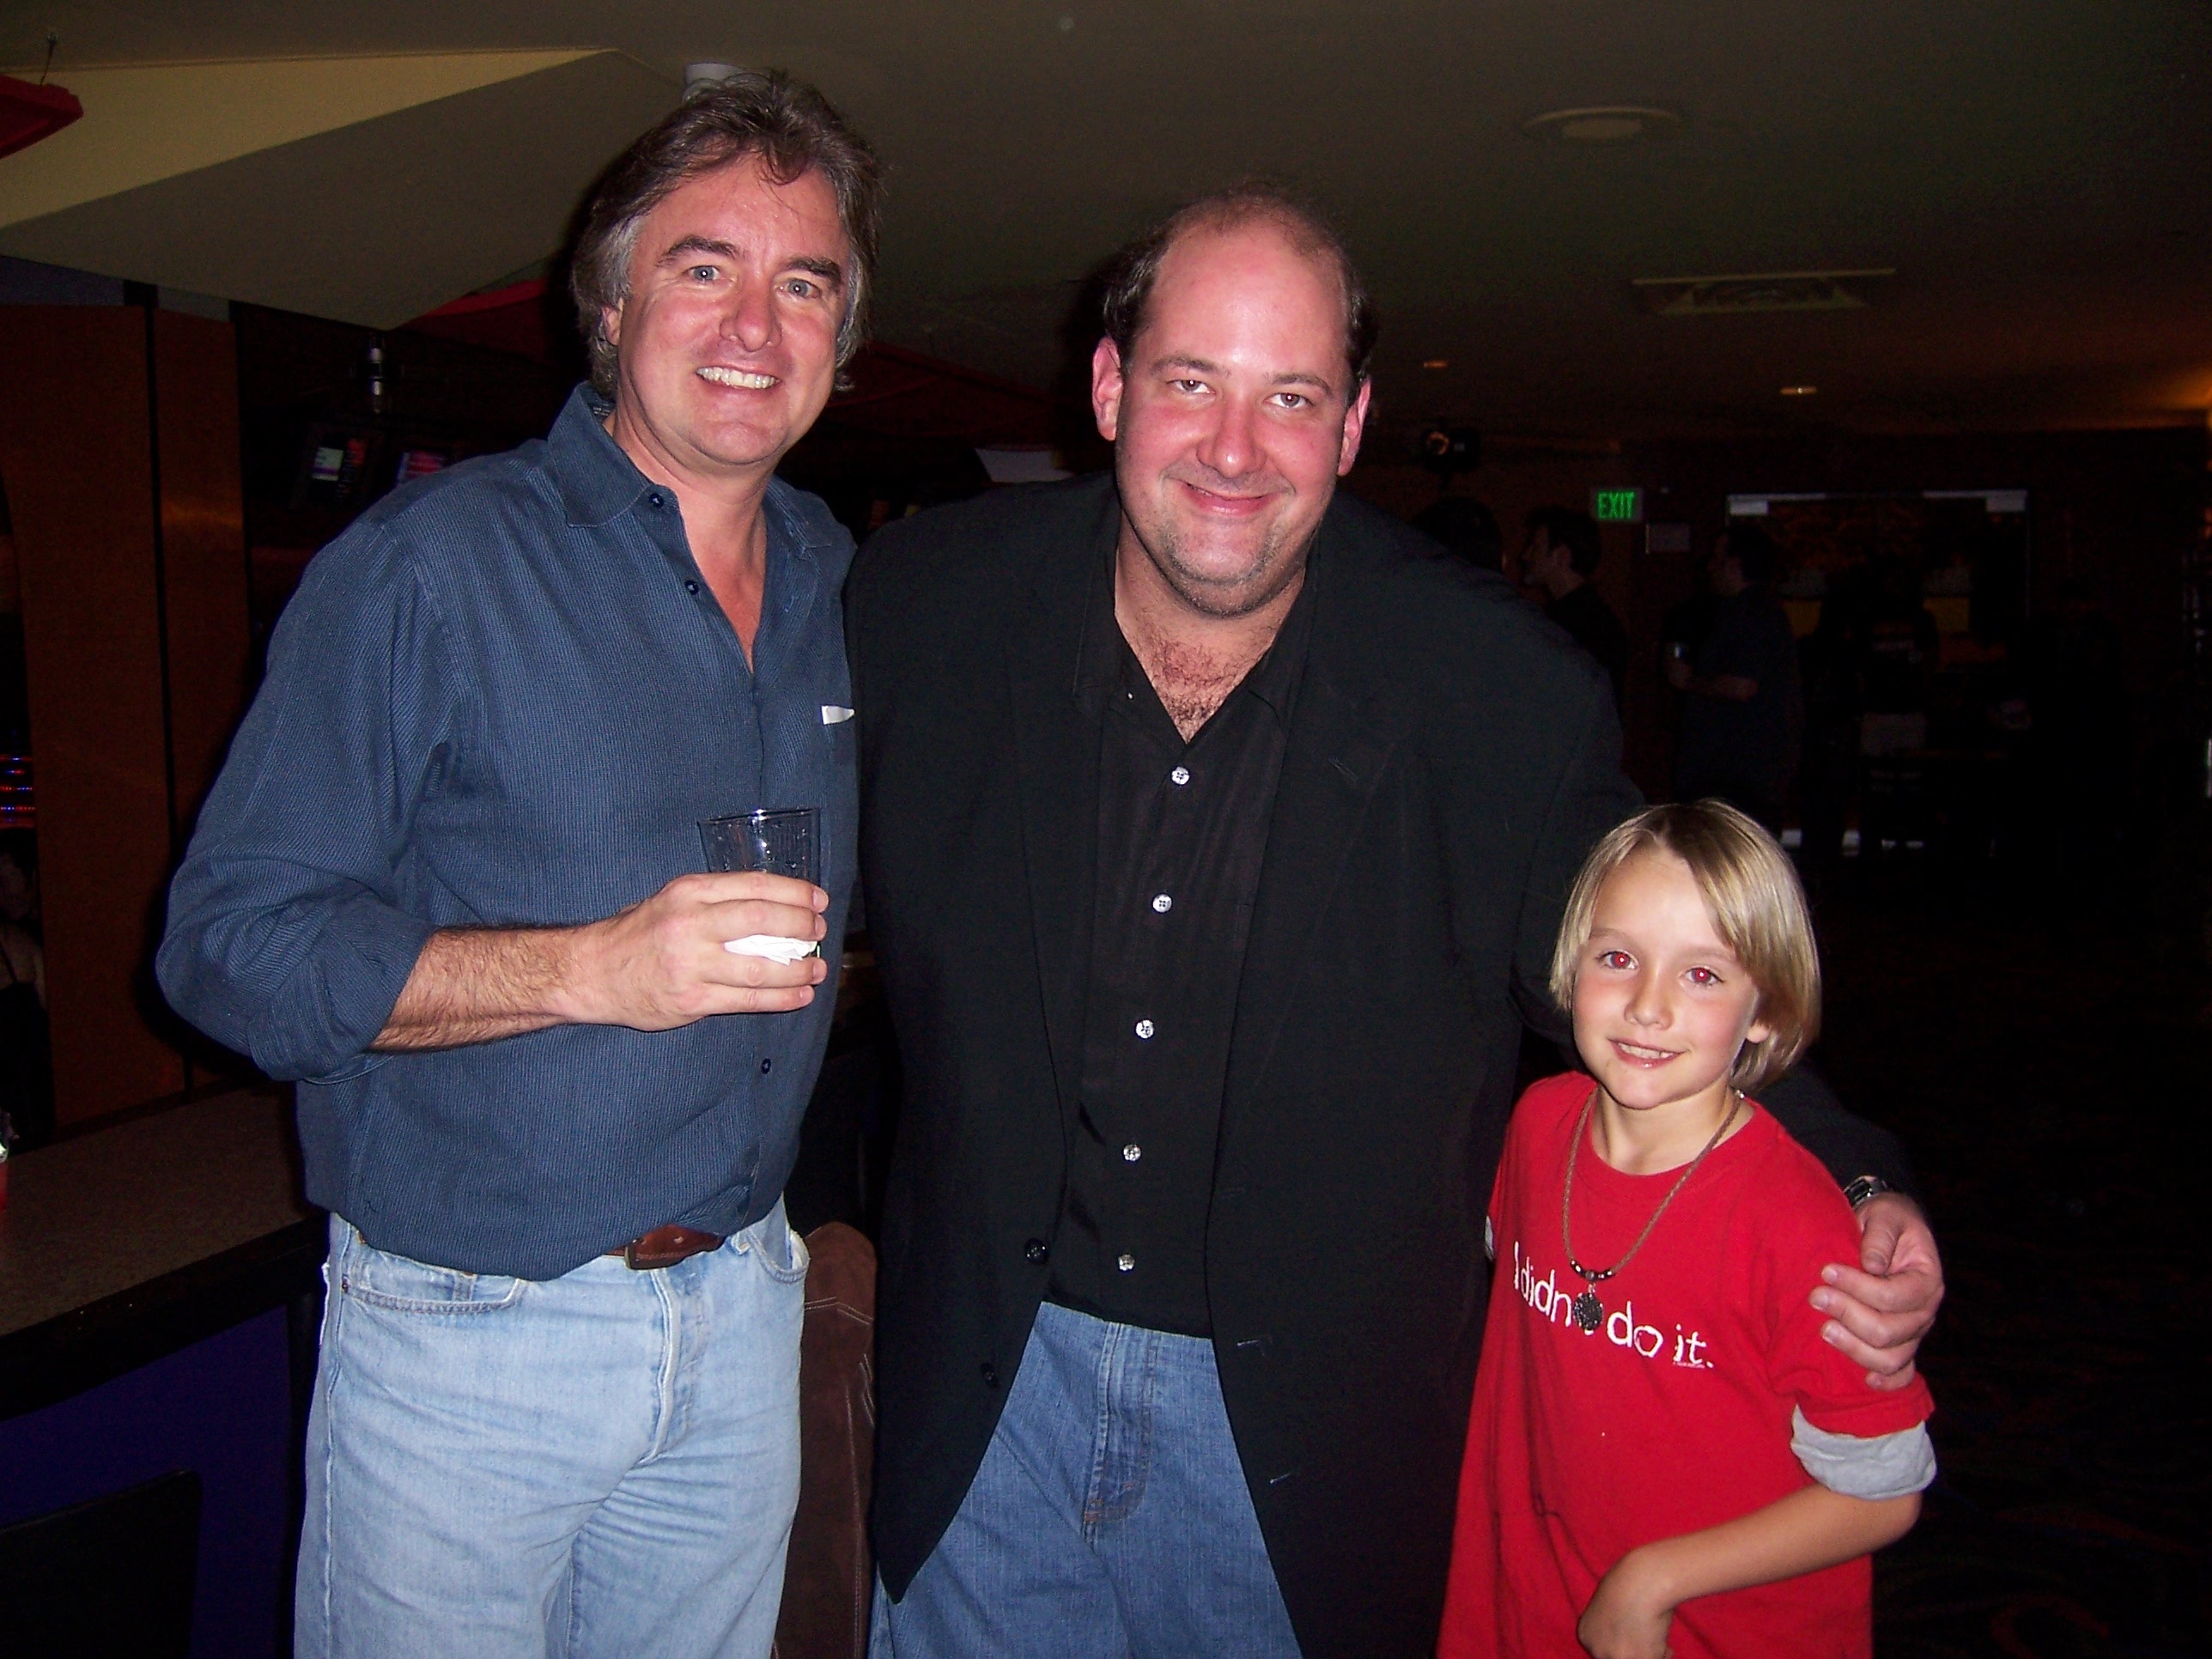 Alec Gray, with his Father (Executive Producer of The Office) and Brian Baumgartner at the Season 3 Wrap Party